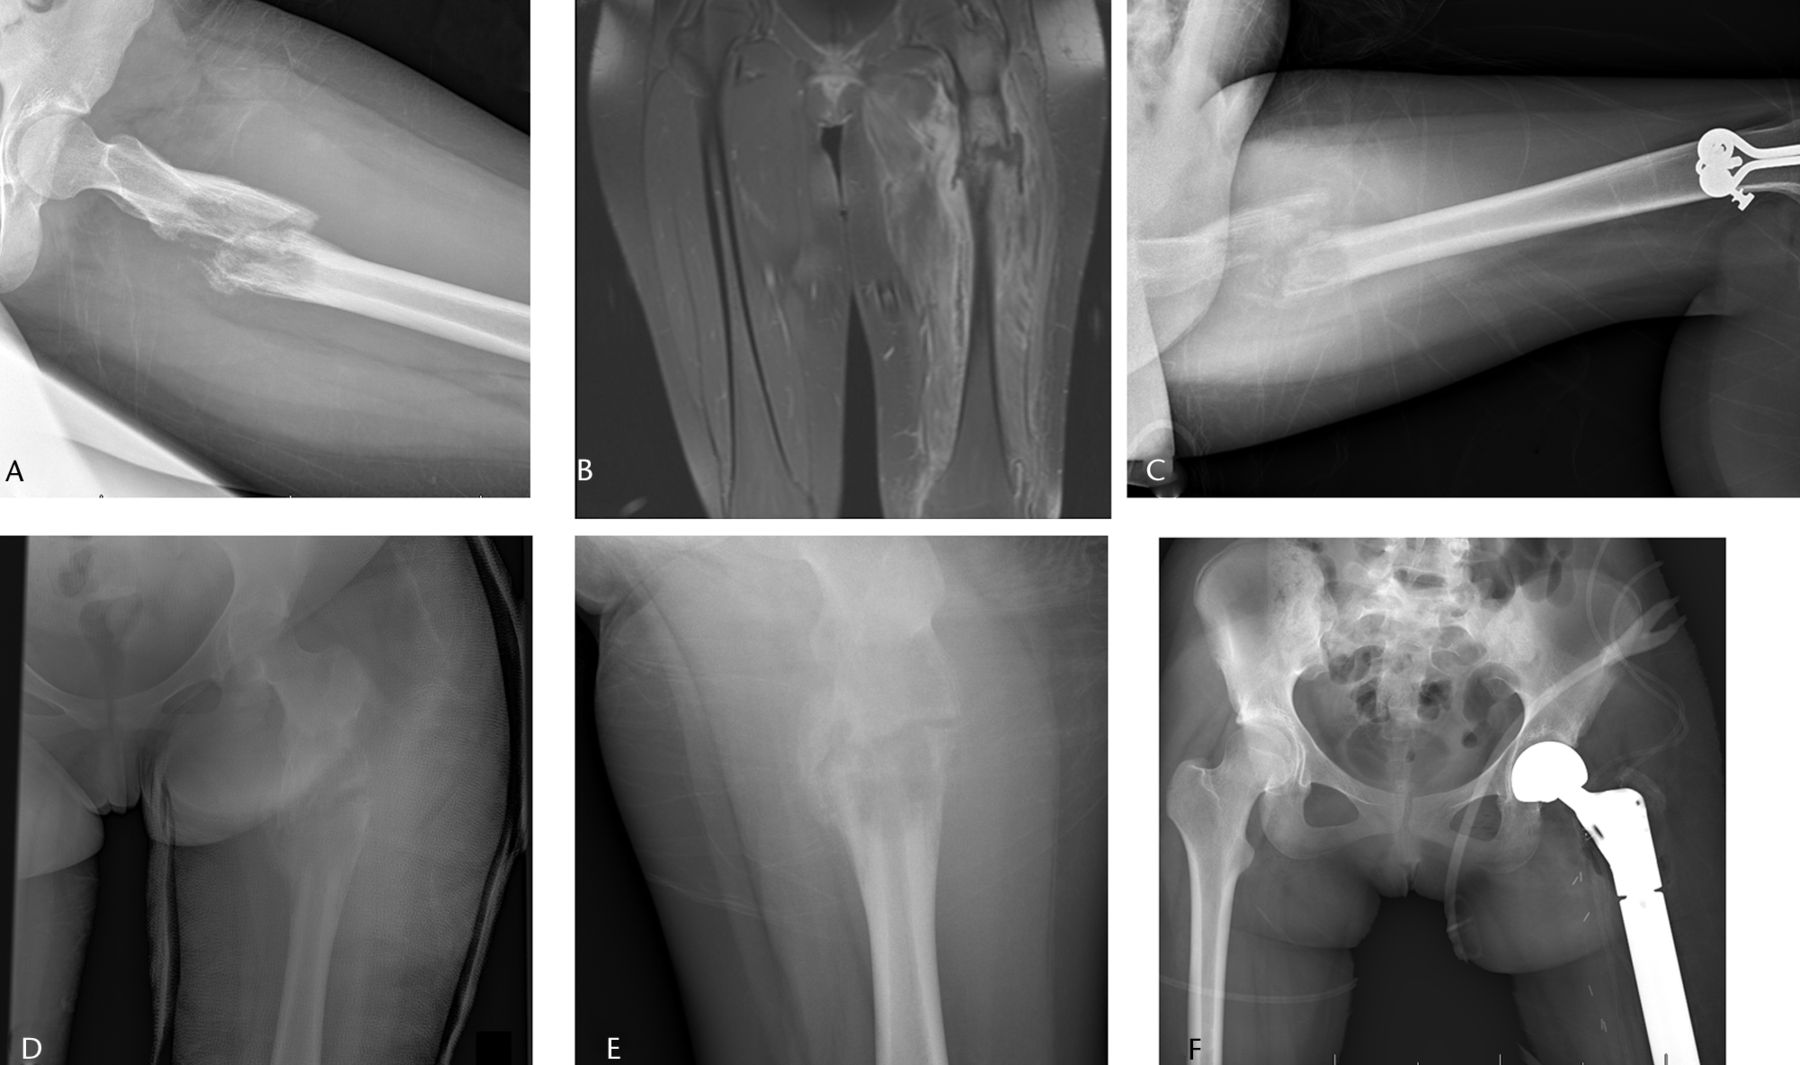 Fig. 4 
          Imaging in a 15-year-old female patient,
a) radiograph at presentation, showing a pathological fracture through
a malignant-appearing lesion of the proximal femur, b) coronal STIR T1-weighted
post-contrast MRI showing the fracture, associated haematoma and
soft-tissue mass, after which a biopsy confirmed a diagnosis of
Ewing sarcoma. The patient underwent six weeks in traction (c) and
six further weeks in a spica cast (d). After neoadjuvant chemotherapy,
the fracture healed (e) and patient underwent a wide resection of
a proximal femoral mass with endoprosthetic replacement (f).
        